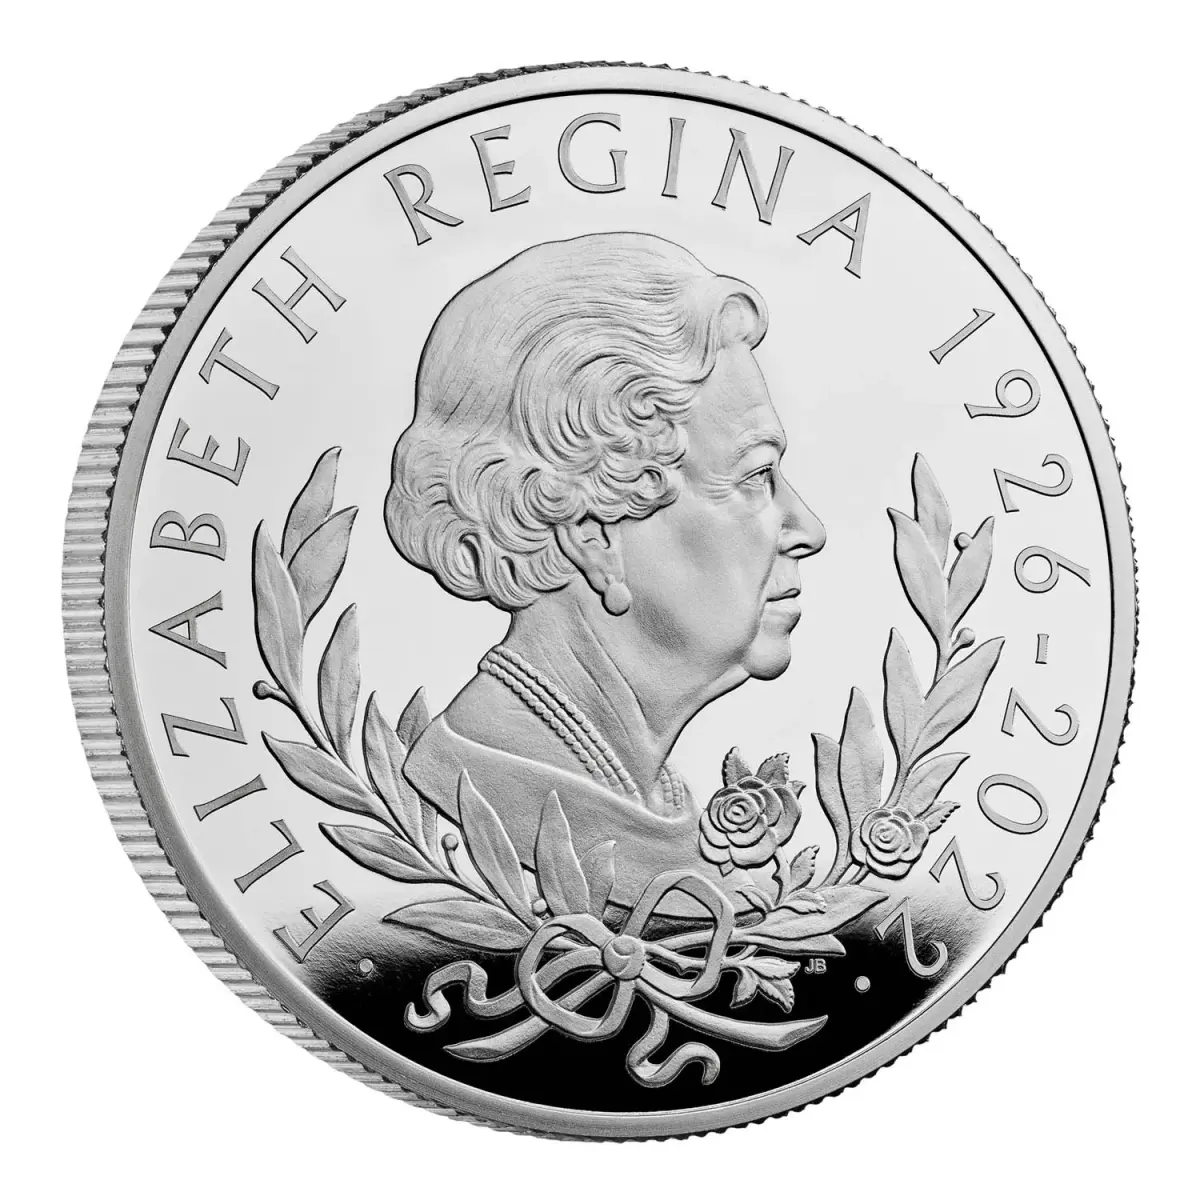 The first reverse design in the new collection by the Royal Mint.